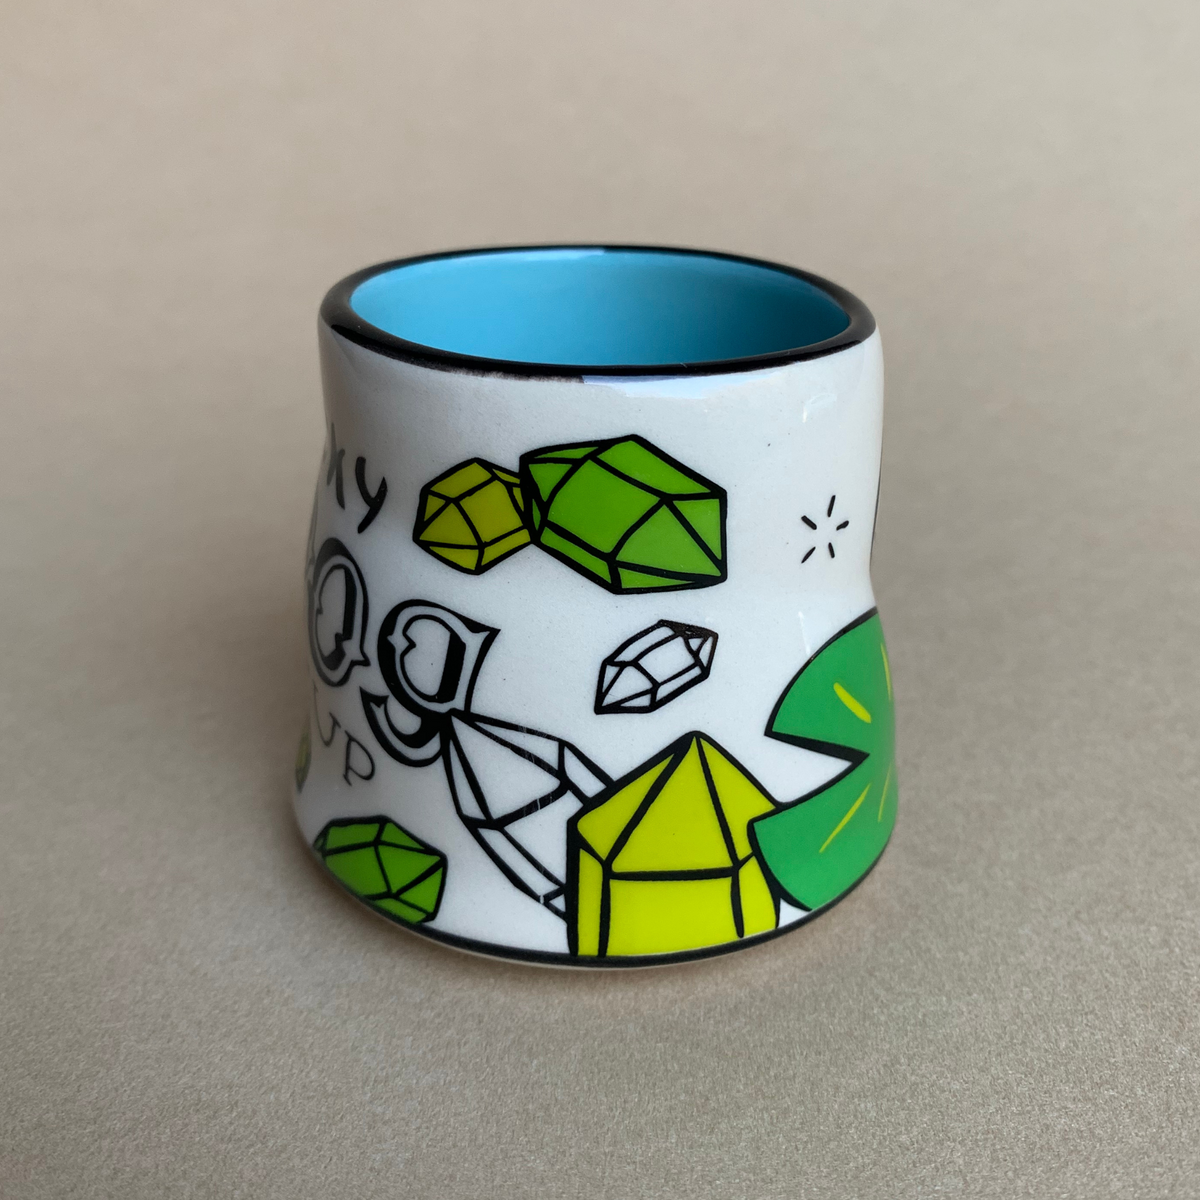 Lucky Frog Cup - Small